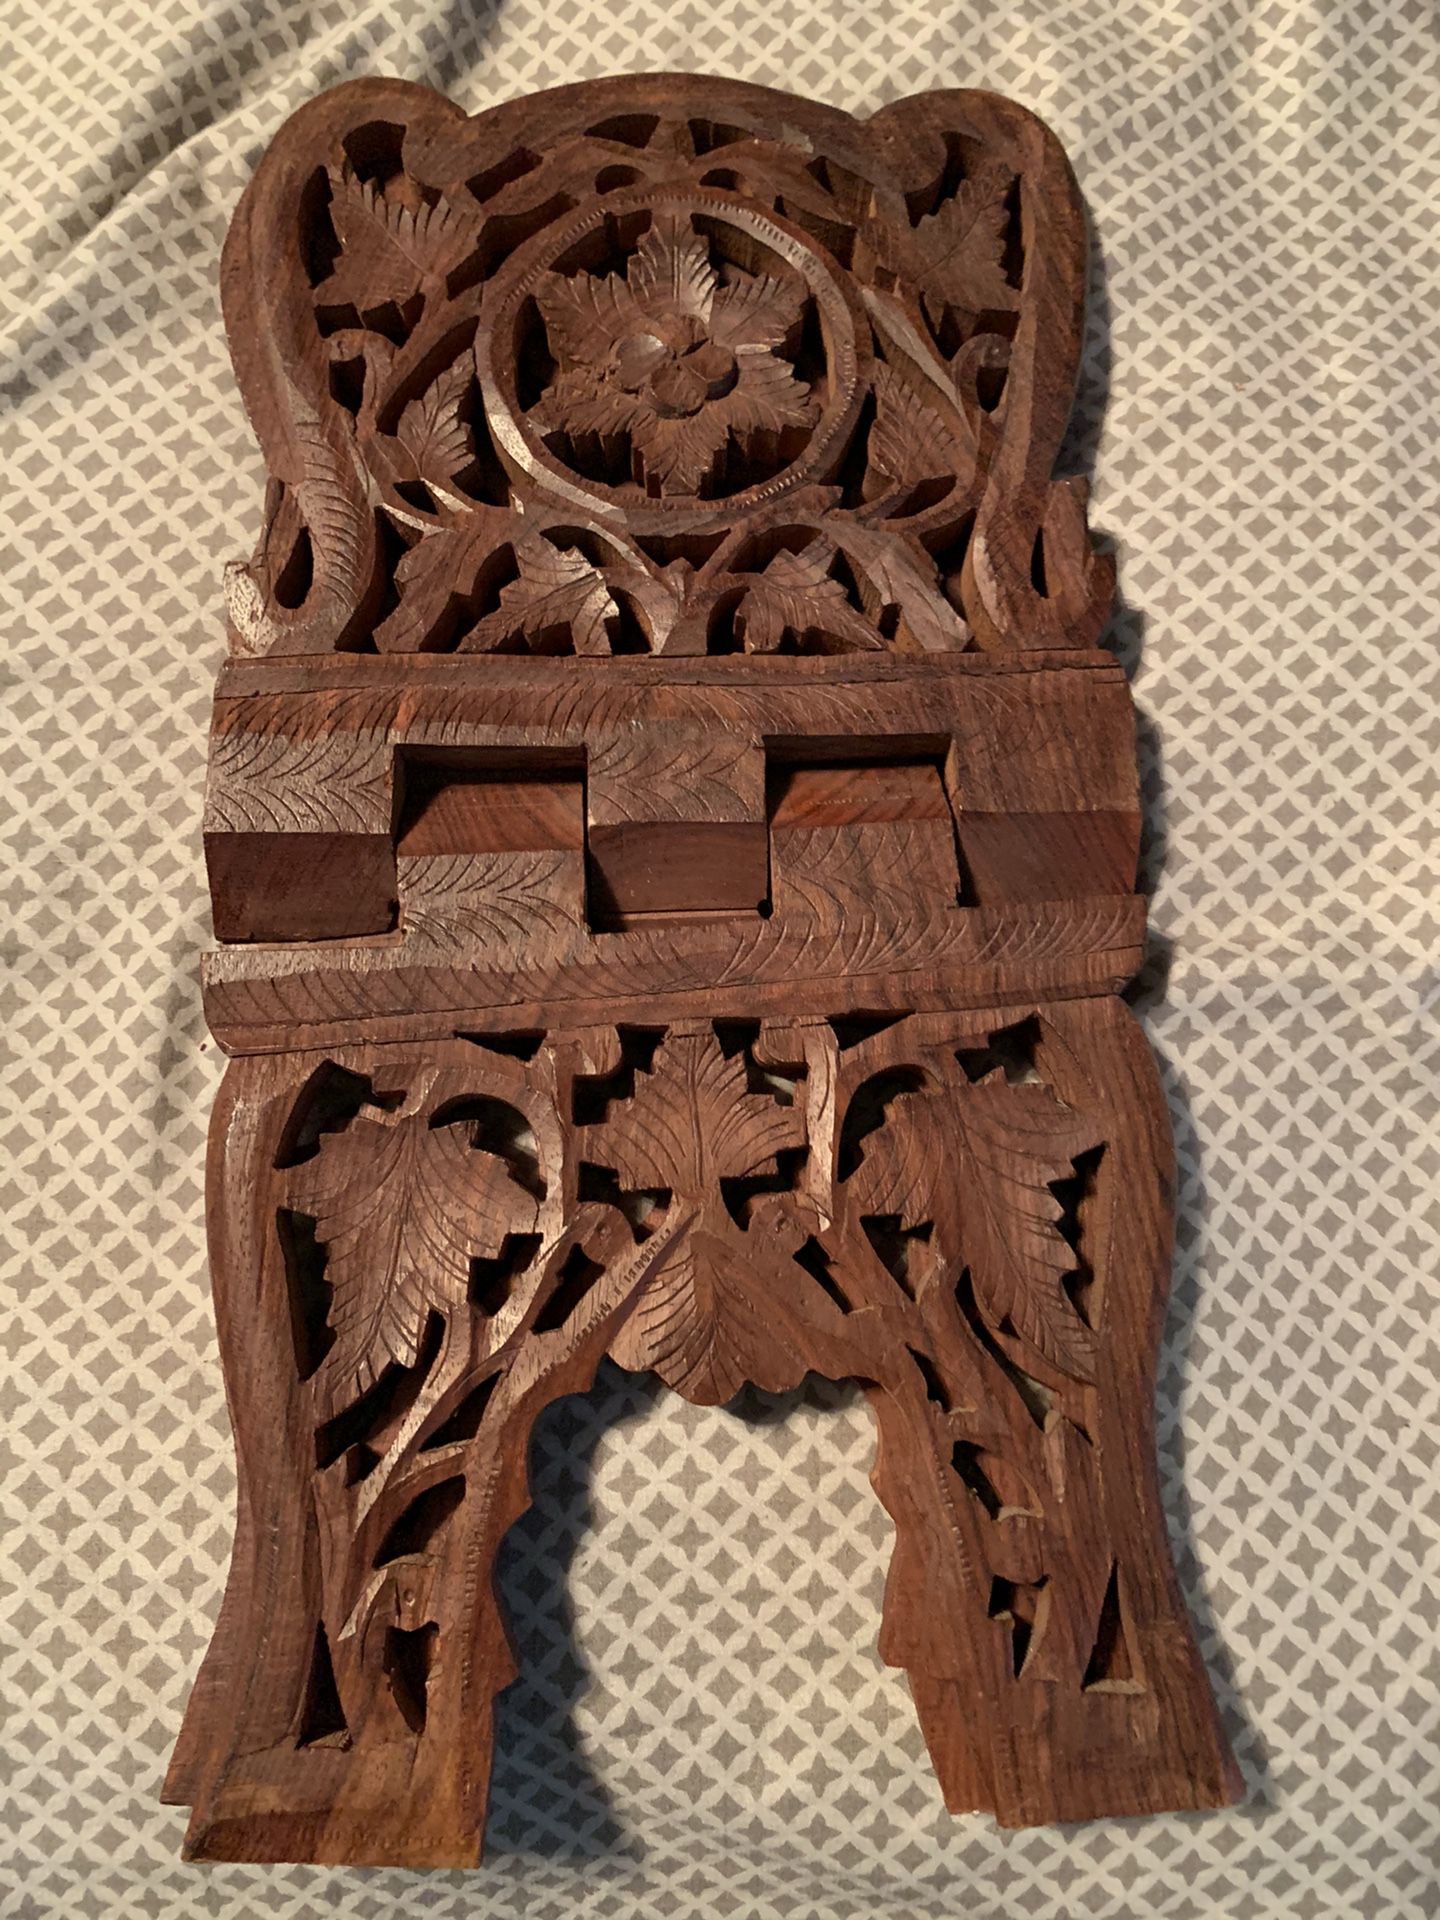 Price Reduced- Hand Carving Decorative Book Reading Wooden Stand for Home, Church or Temple Use